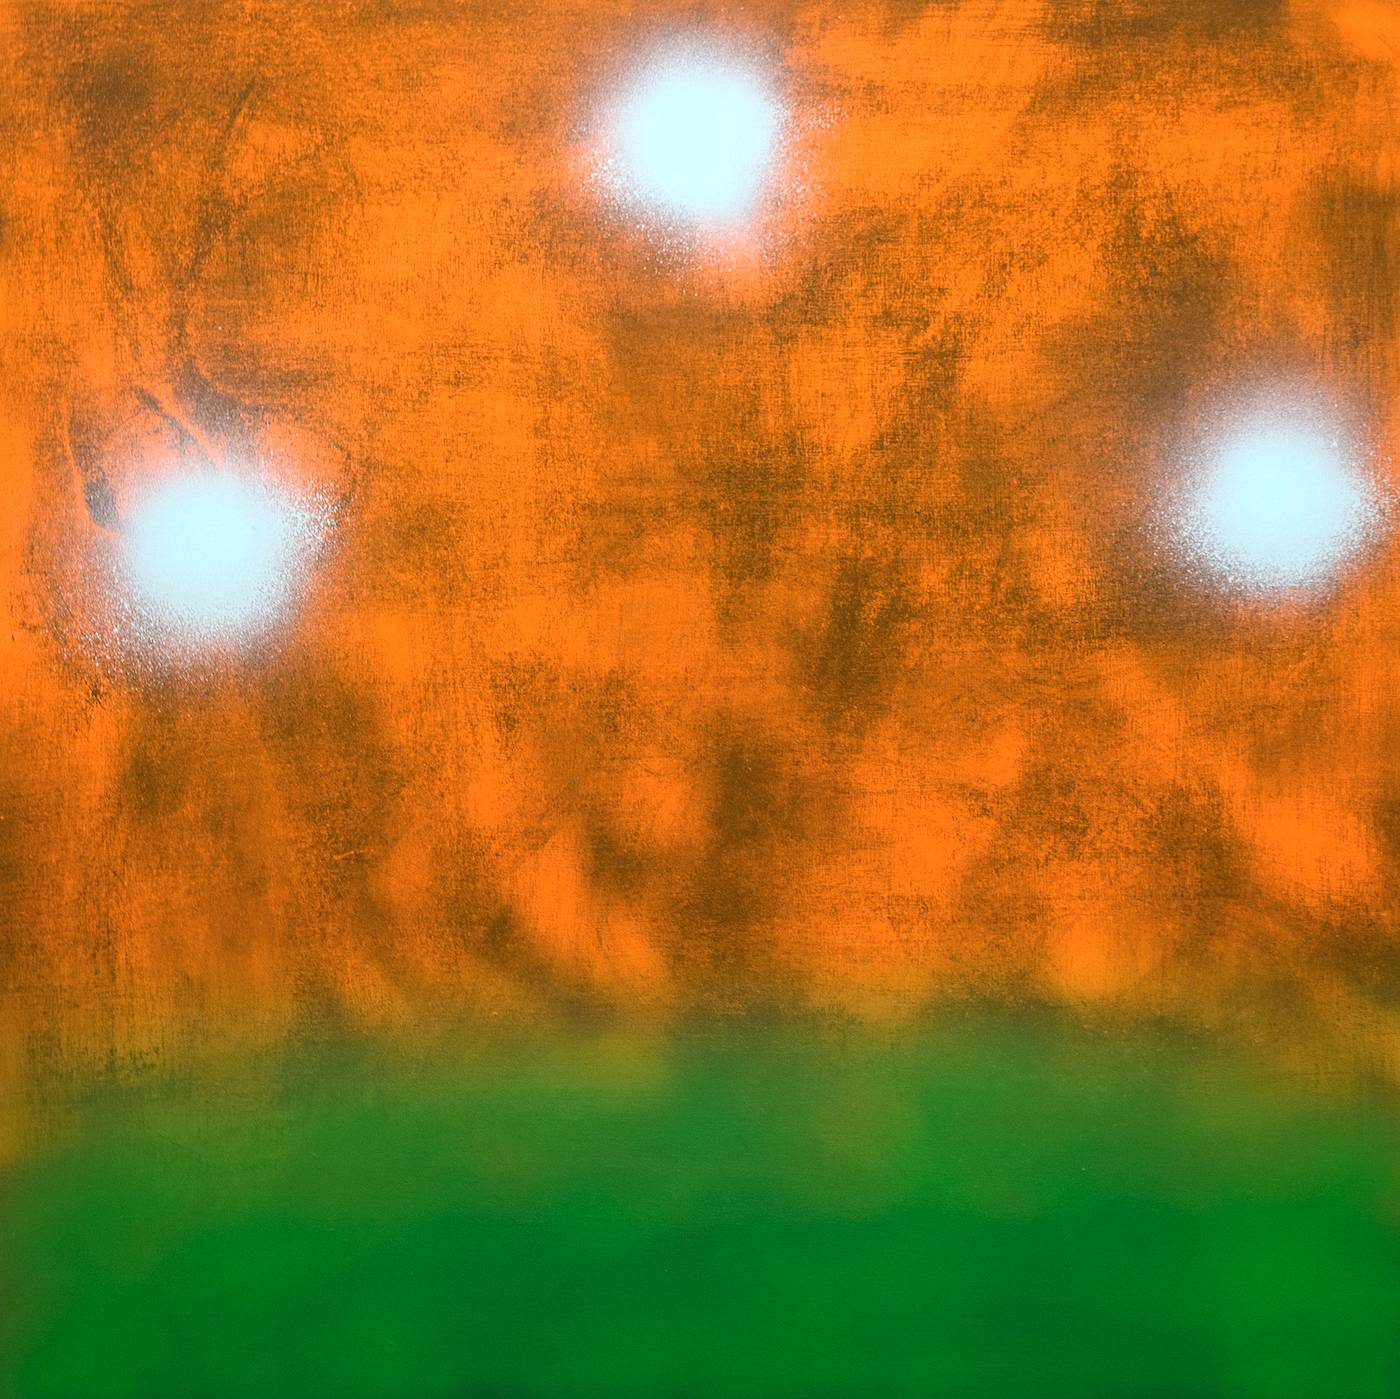 "The Last Three Visible Stars Amidst a Night Sky Polluted by Trump" acrylic paint, acrylic resin spray paint on 24 x 24 x 1.75 inches deep cradled wood panel, 2018, signed by the artist on the side, signed, titled, and dated by the artist on the reverse.